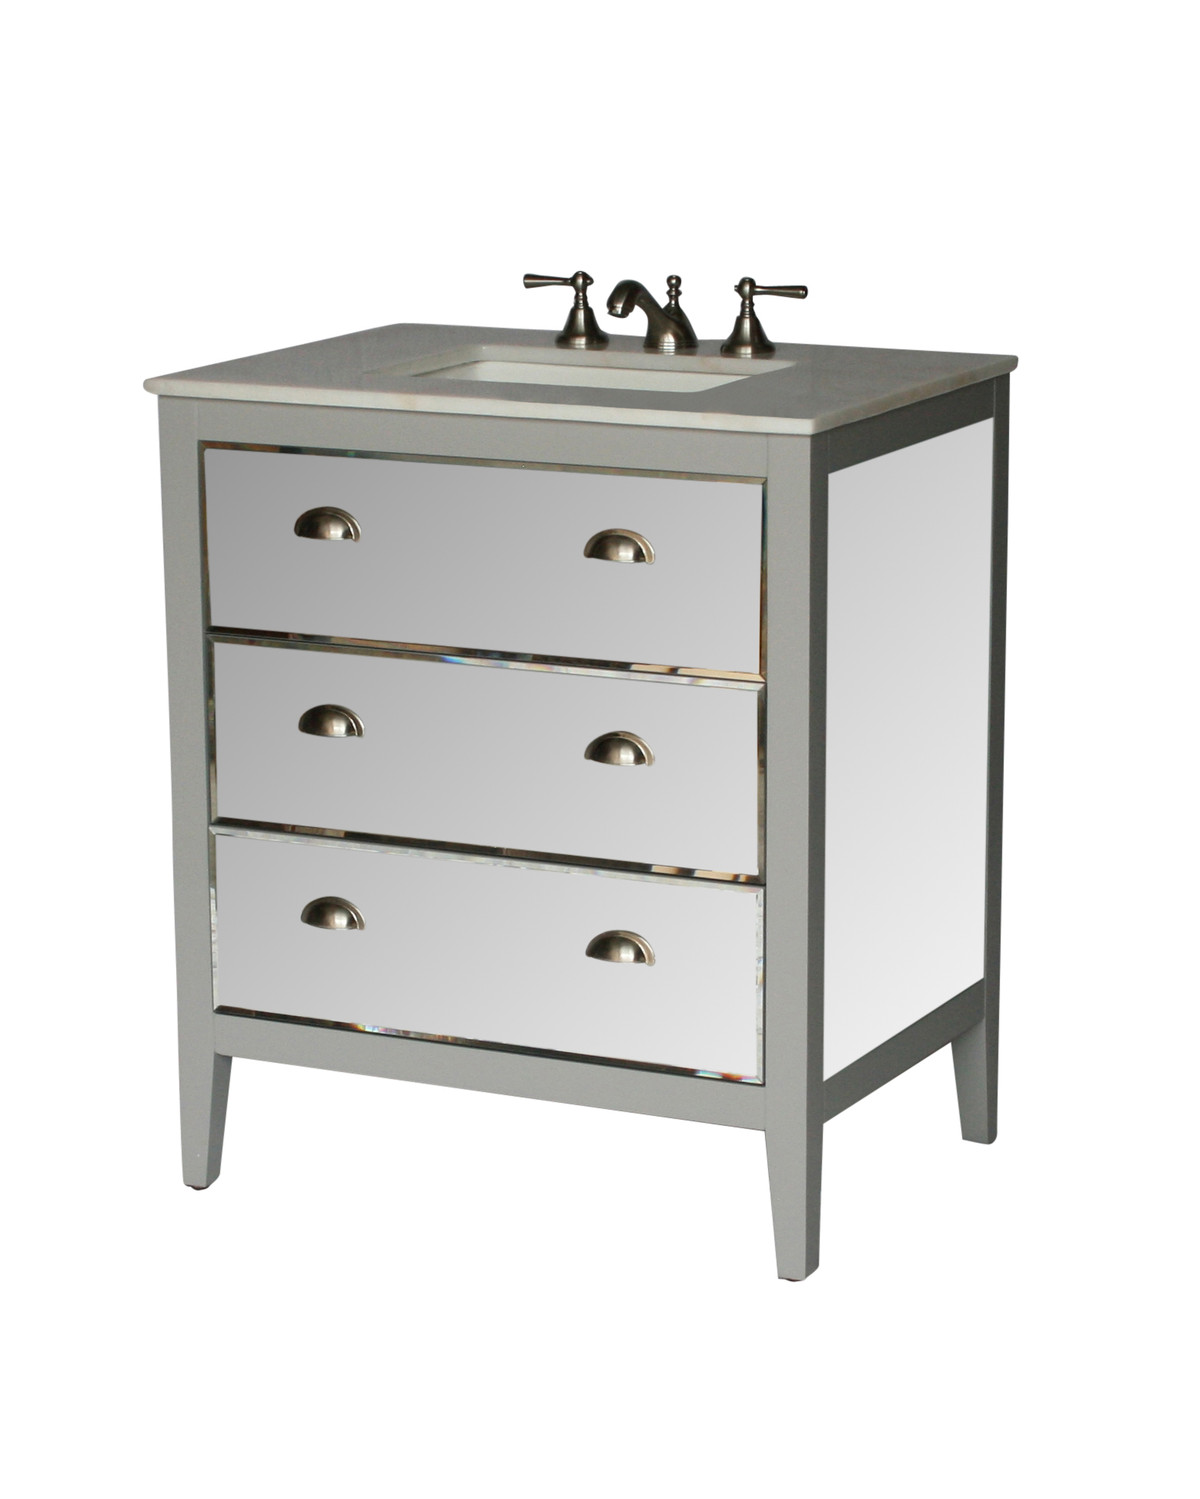 30" Adelina Contemporary Style Single Sink Bathroom Vanity with Imperial White Stone Countertop and Mirrored Cabinet in Gray Trims Finish